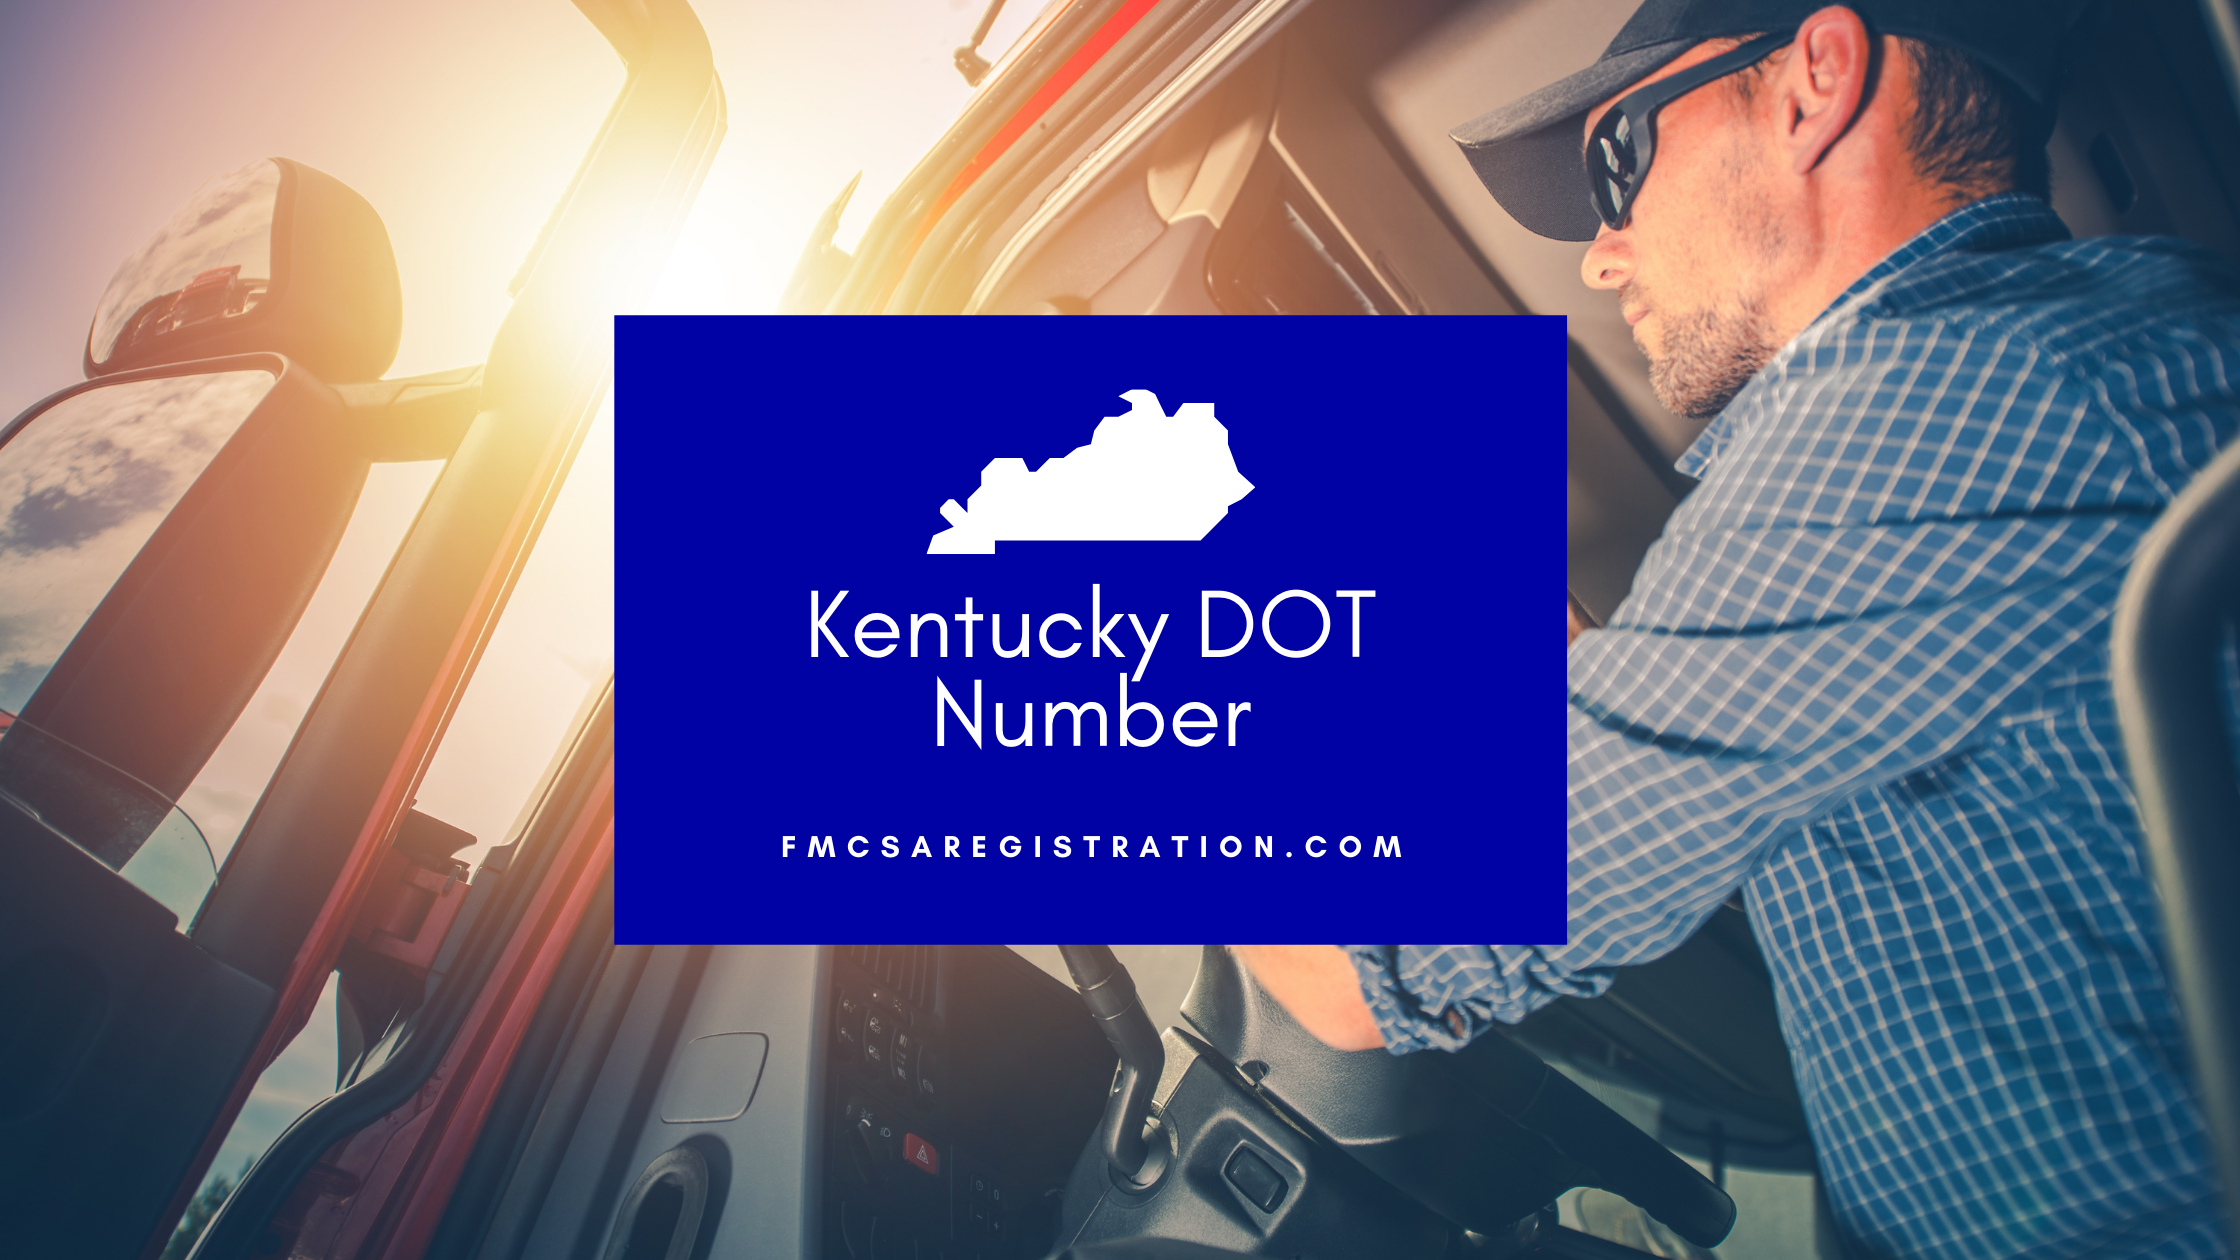 Kentucky DOT Number product image reference 1